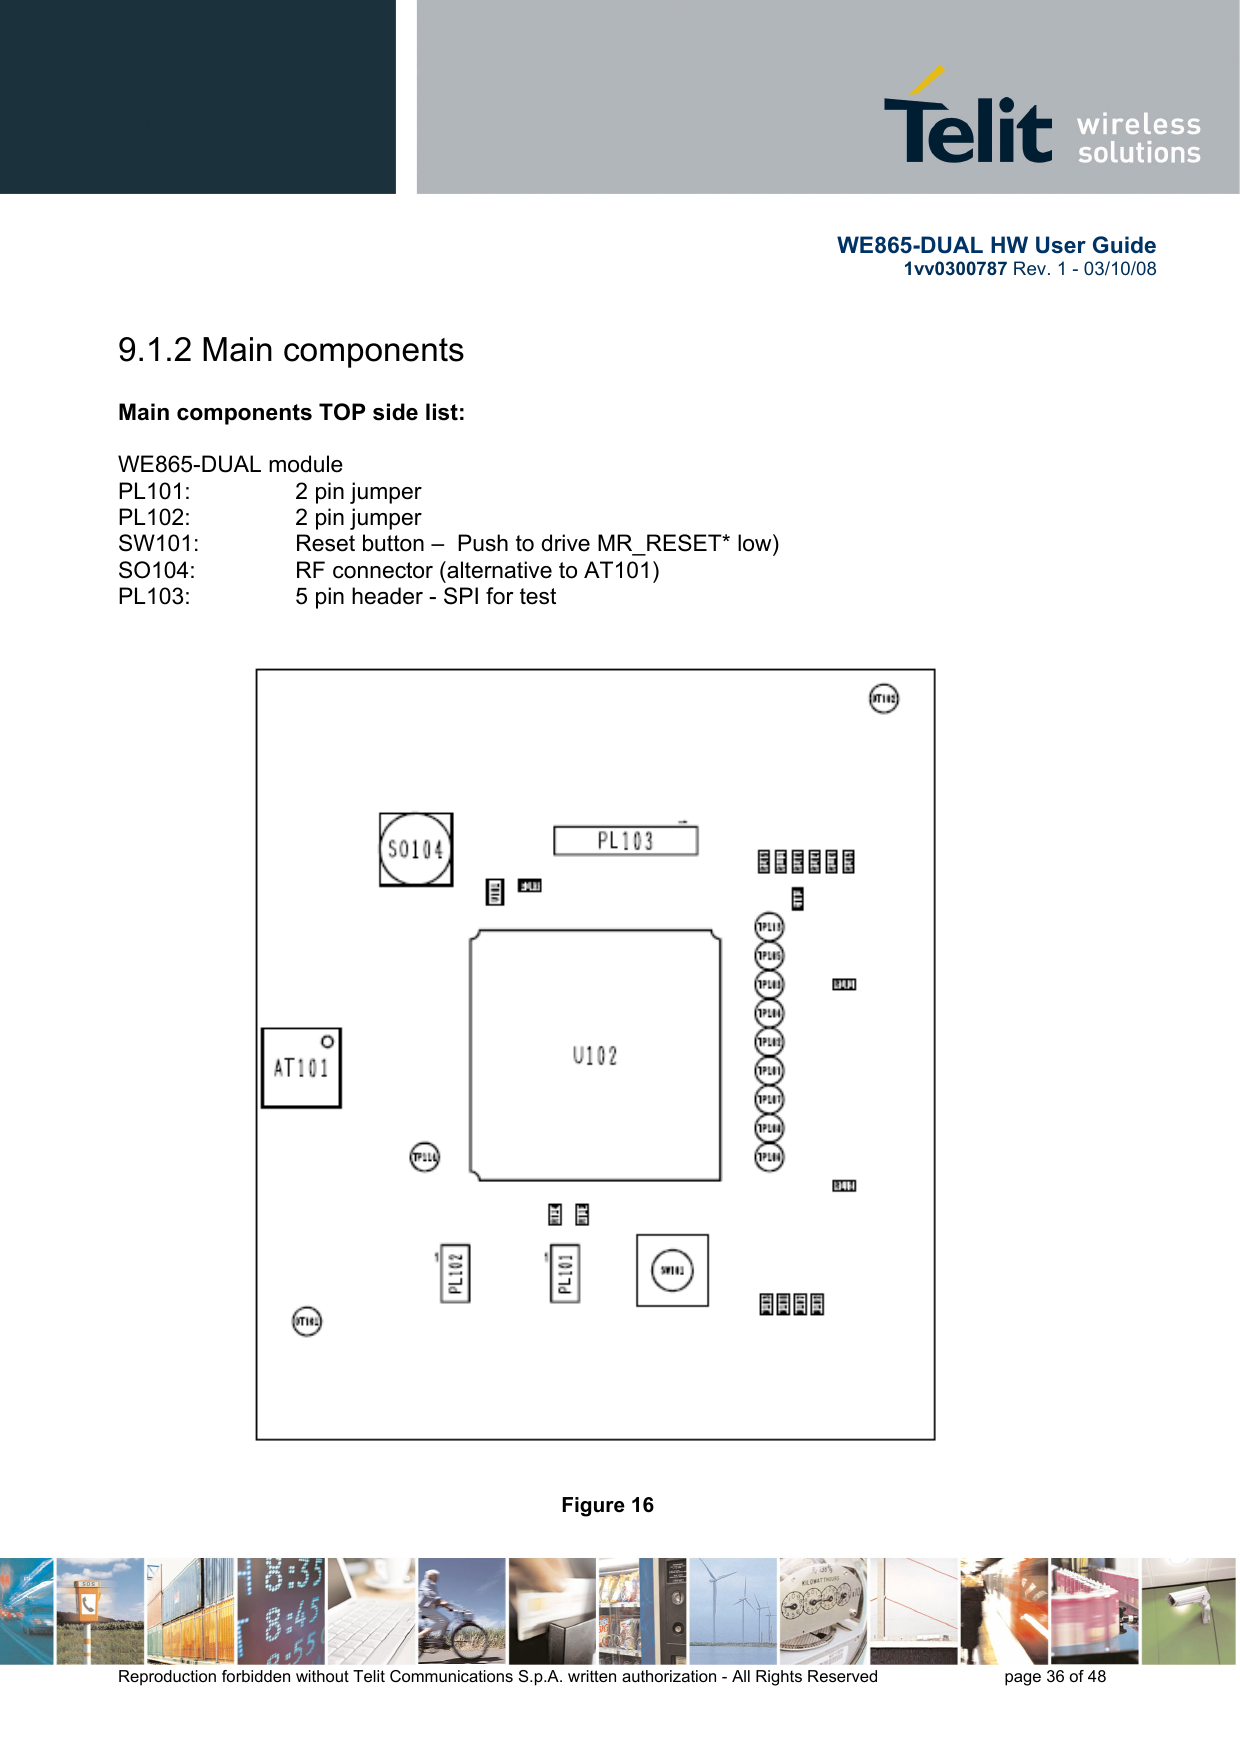       WE865-DUAL HW User Guide 1vv0300787 Rev. 1 - 03/10/08      Reproduction forbidden without Telit Communications S.p.A. written authorization - All Rights Reserved    page 36 of 48  9.1.2 Main components    Main components TOP side list:  WE865-DUAL module PL101:    2 pin jumper  PL102:    2 pin jumper   SW101:   Reset button –  Push to drive MR_RESET* low) SO104:    RF connector (alternative to AT101) PL103:    5 pin header - SPI for test                            Figure 16  